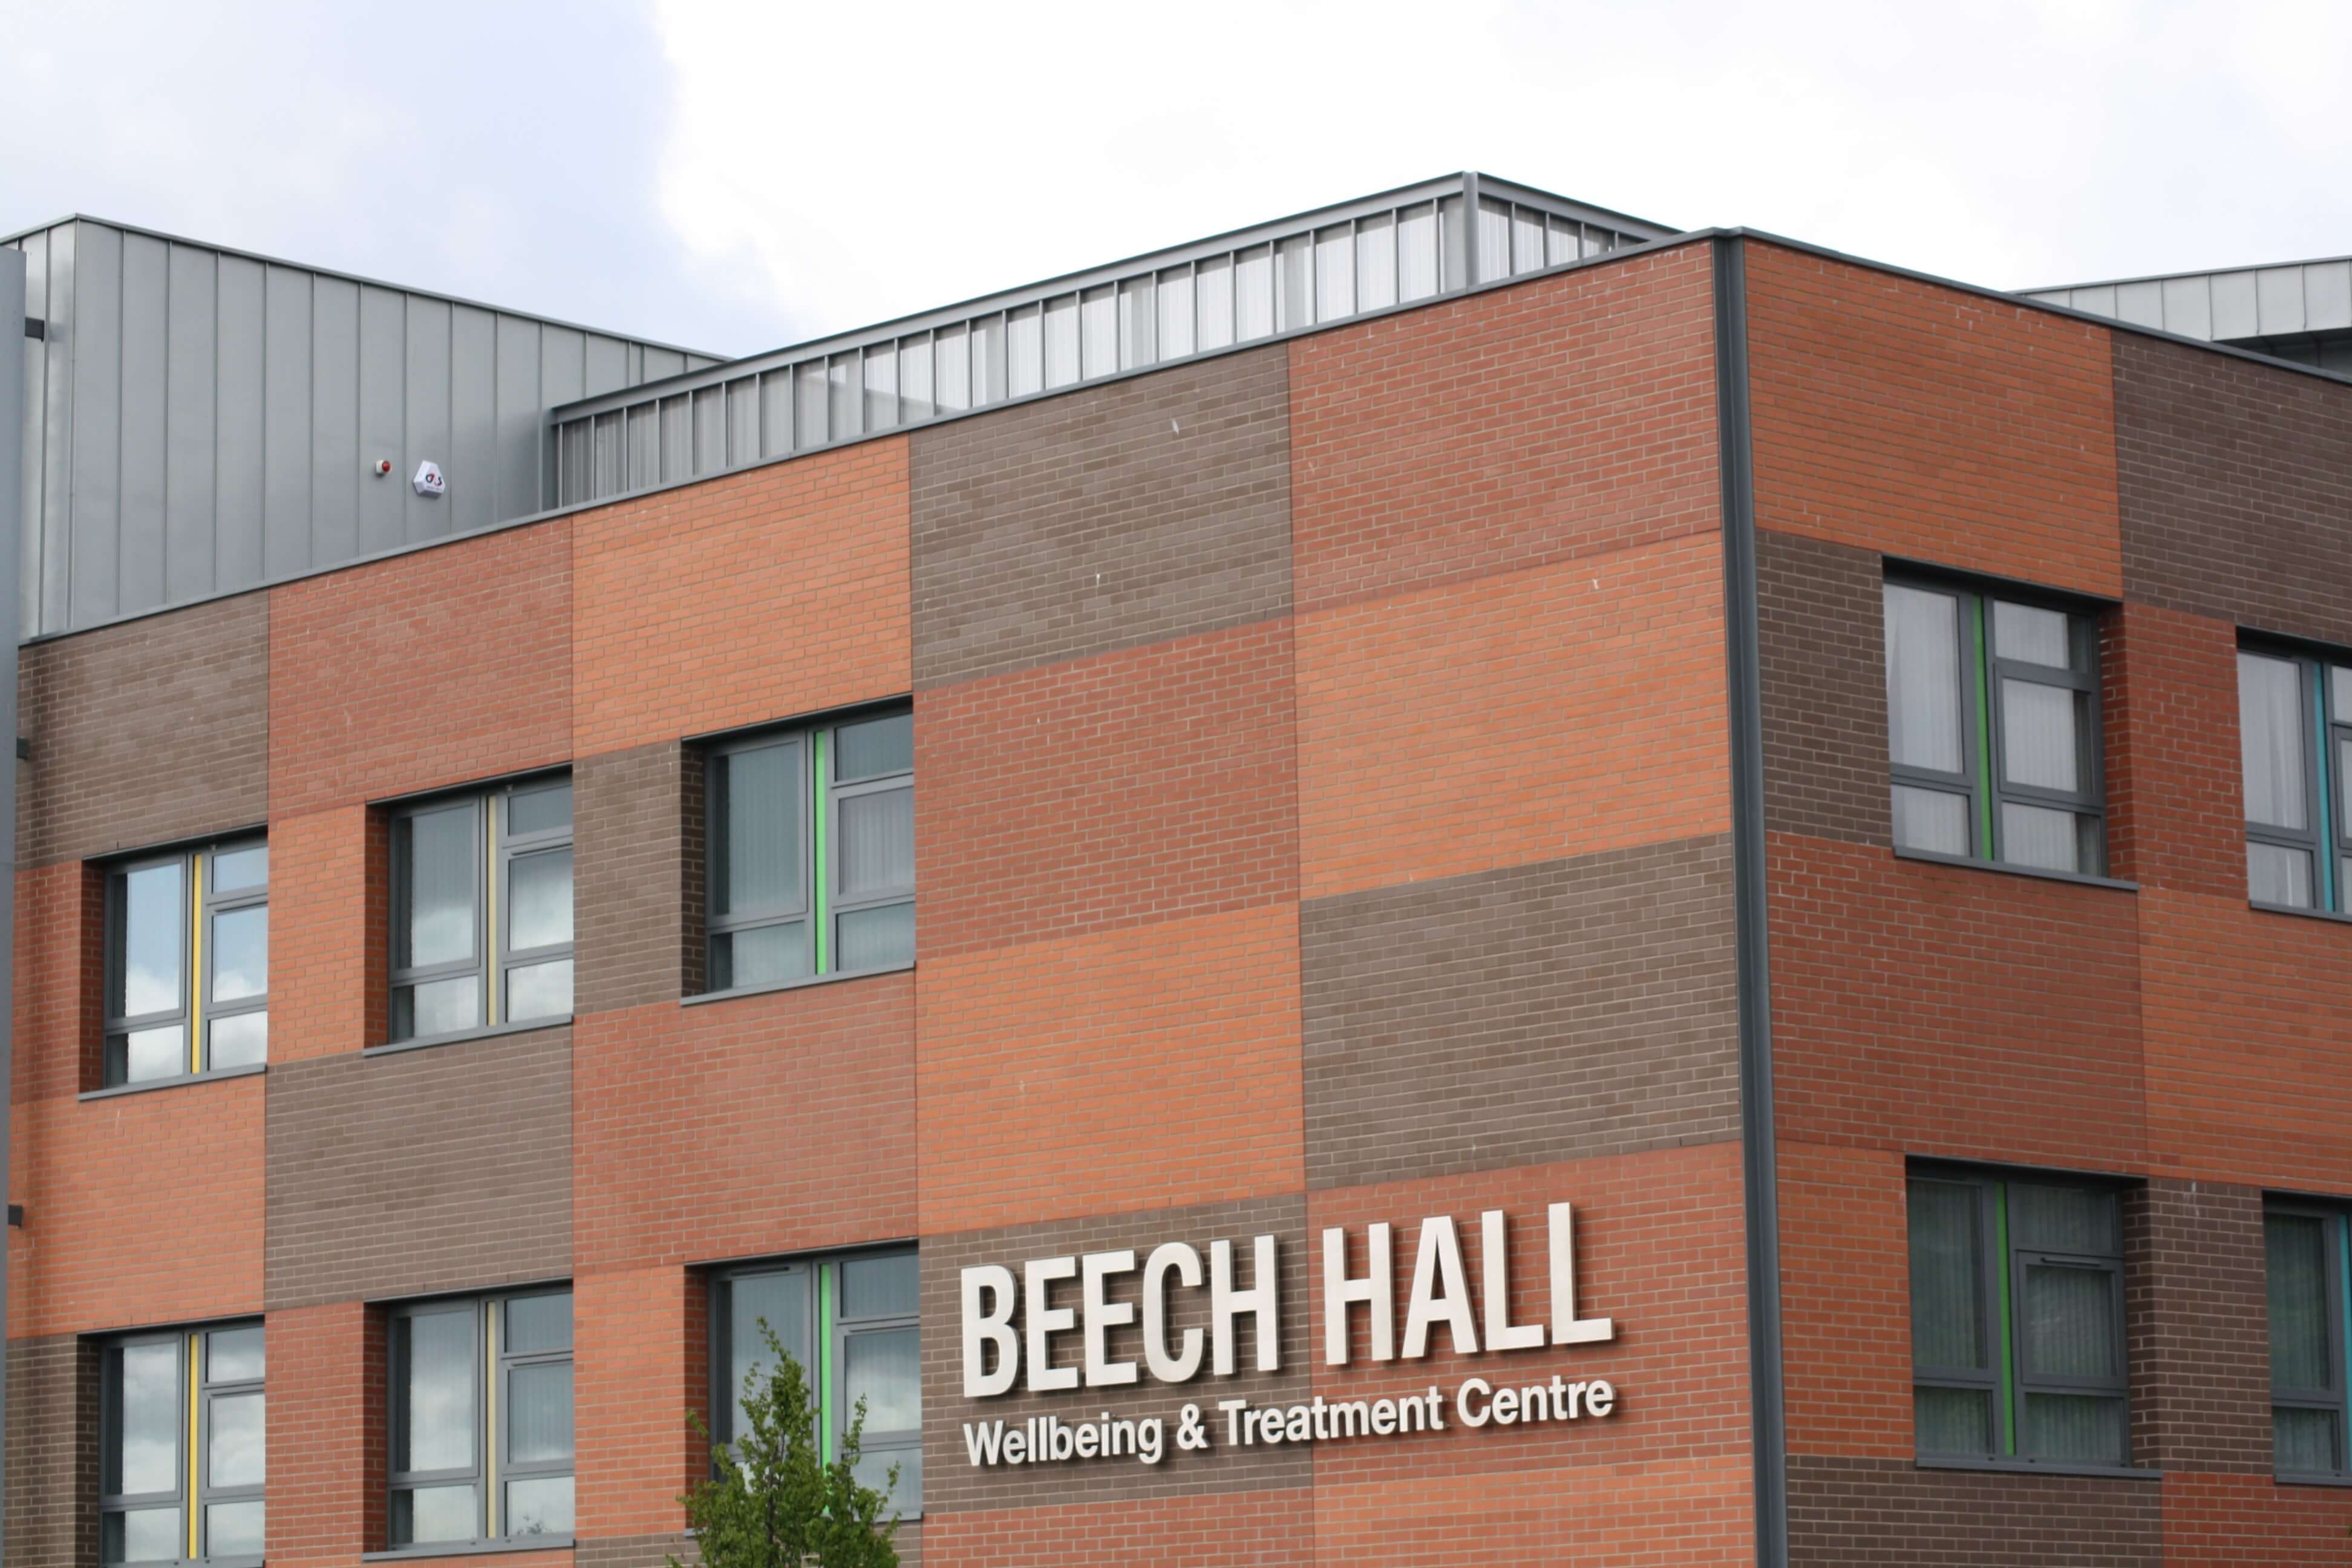 PROJECT: BEECH HALL WELLBEING & TREATMENT CENTRE, BELFAST. ARCHITECT. TODD ARCHITECTS, BELFAST MATERIAL. RHEINZINK BLUE GREY SYSTEM. TRADITIONAL STANDING SEAM